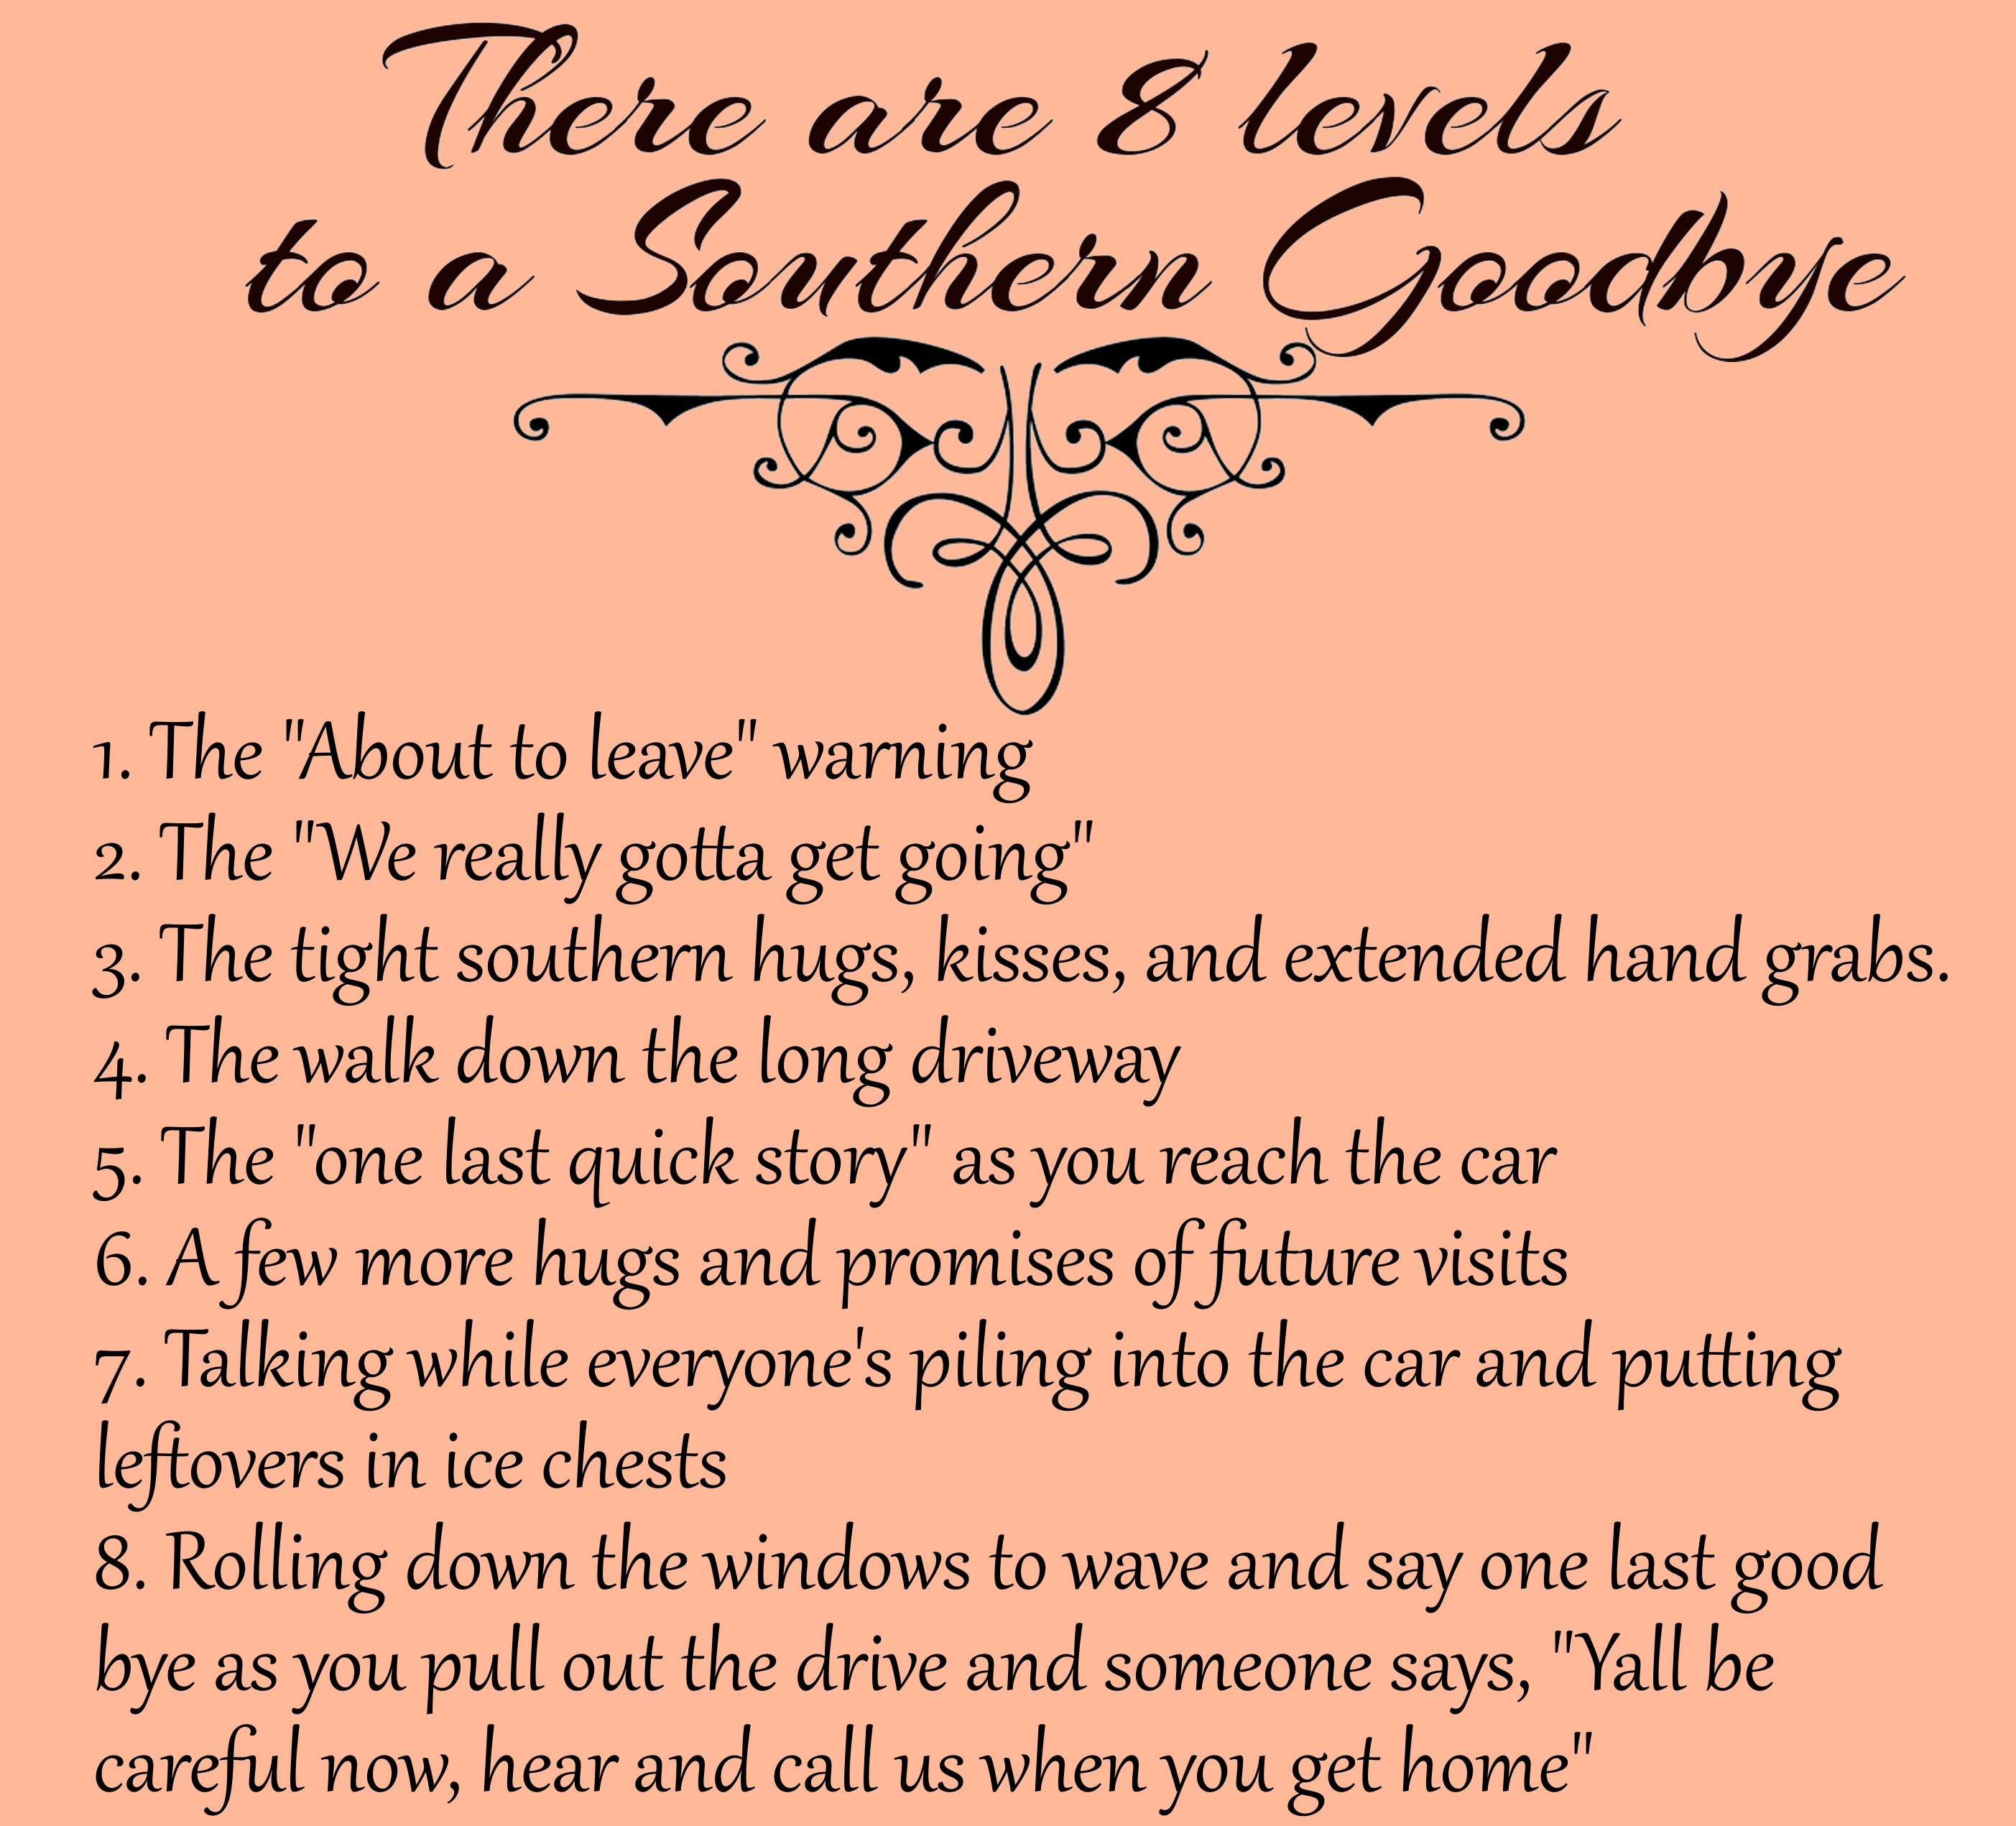 handwriting - There are 8 levels to a Southern Goodbye 1. The "About to leave" warning 2. The "We really gotta get going" 3. The tight southern hugs, kisses, and extended hand grabs. 4. The walk down the long driveway 5. The "one last quick story" as you 